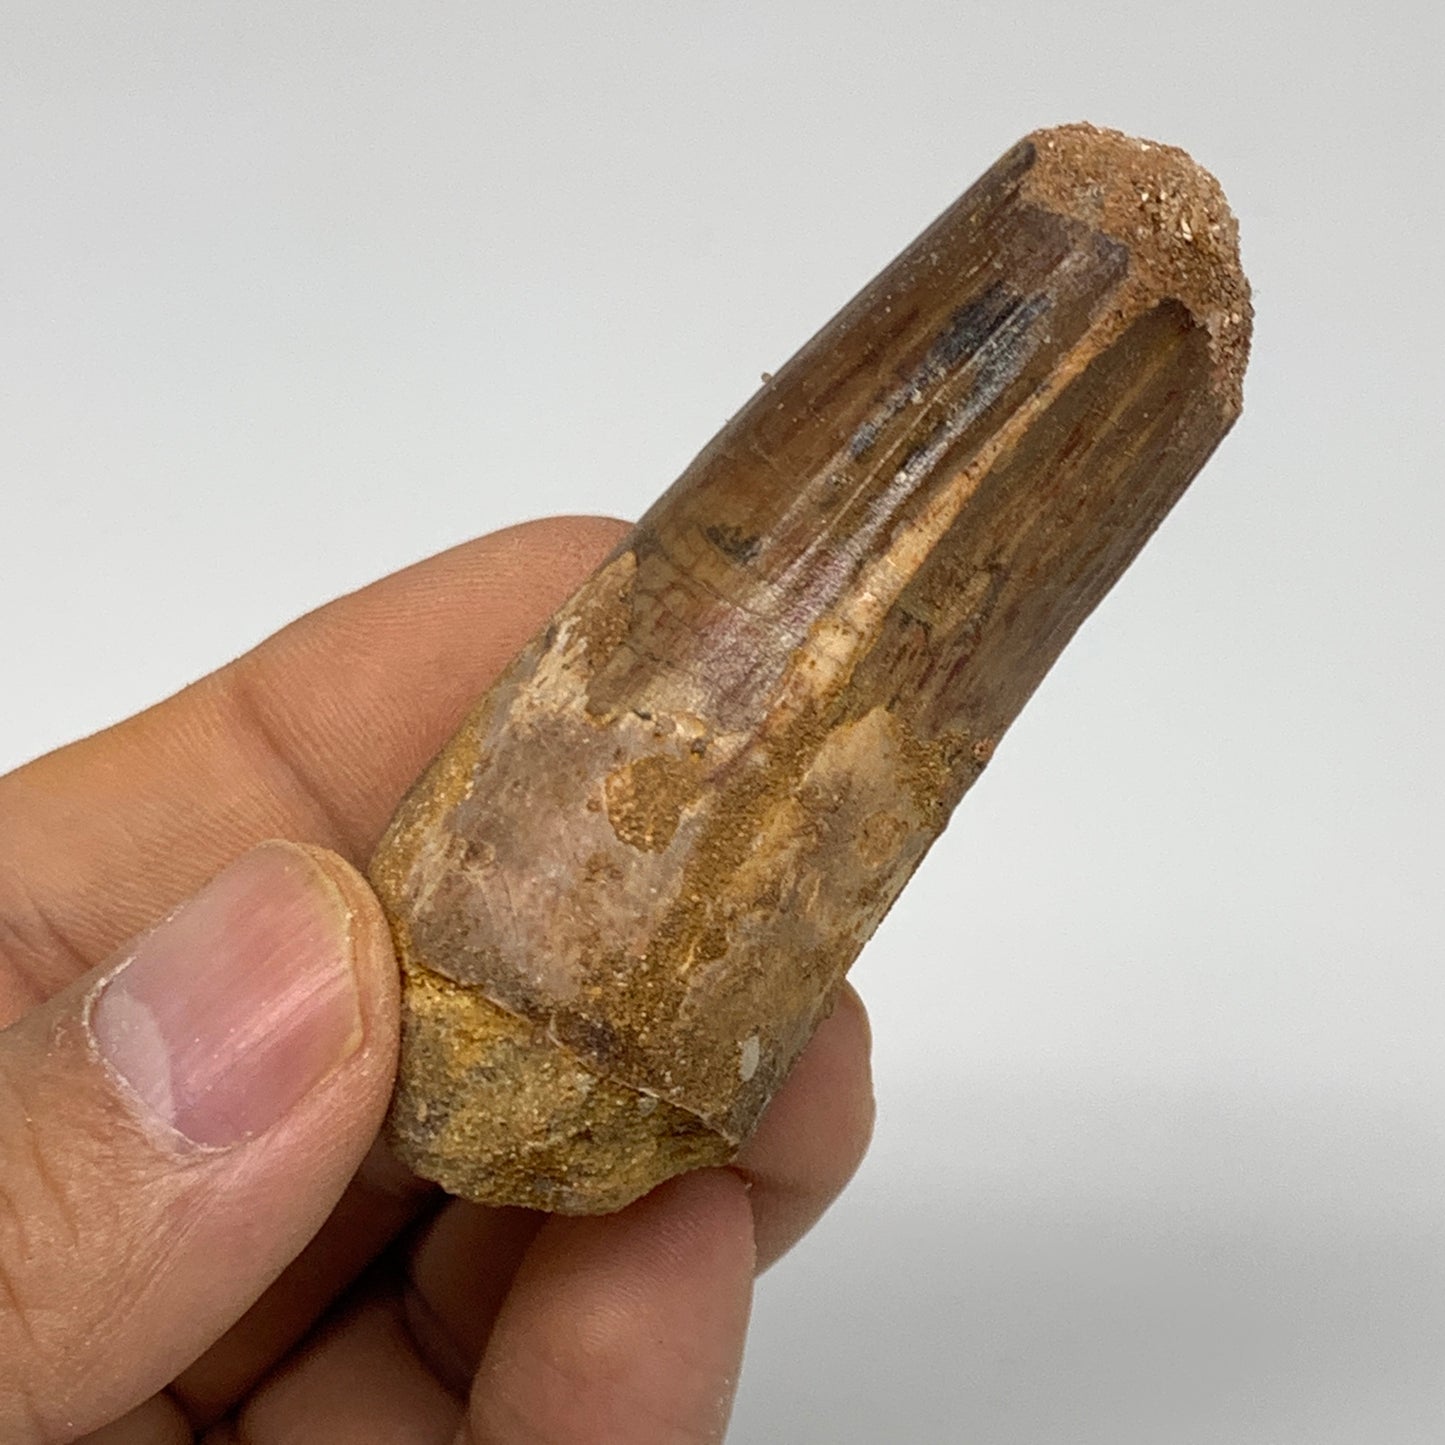 48.1g, 2.5"X1.2"x 1", Rare Natural Fossils Spinosaurus Tooth from Morocco, F3230